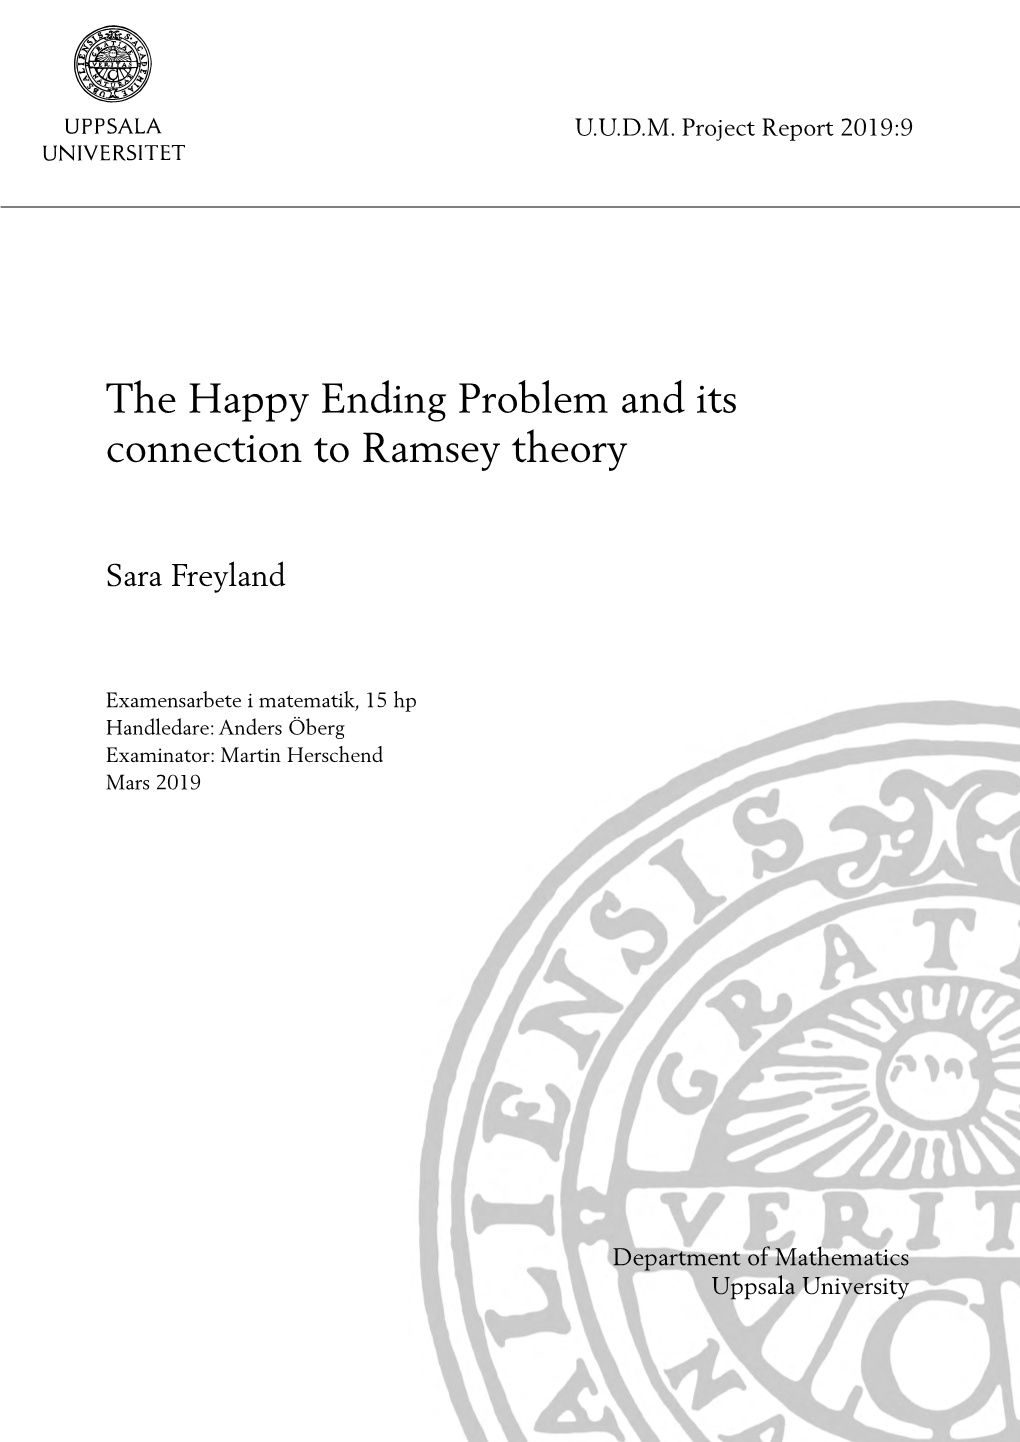 The Happy Ending Problem and Its Connection to Ramsey Theory